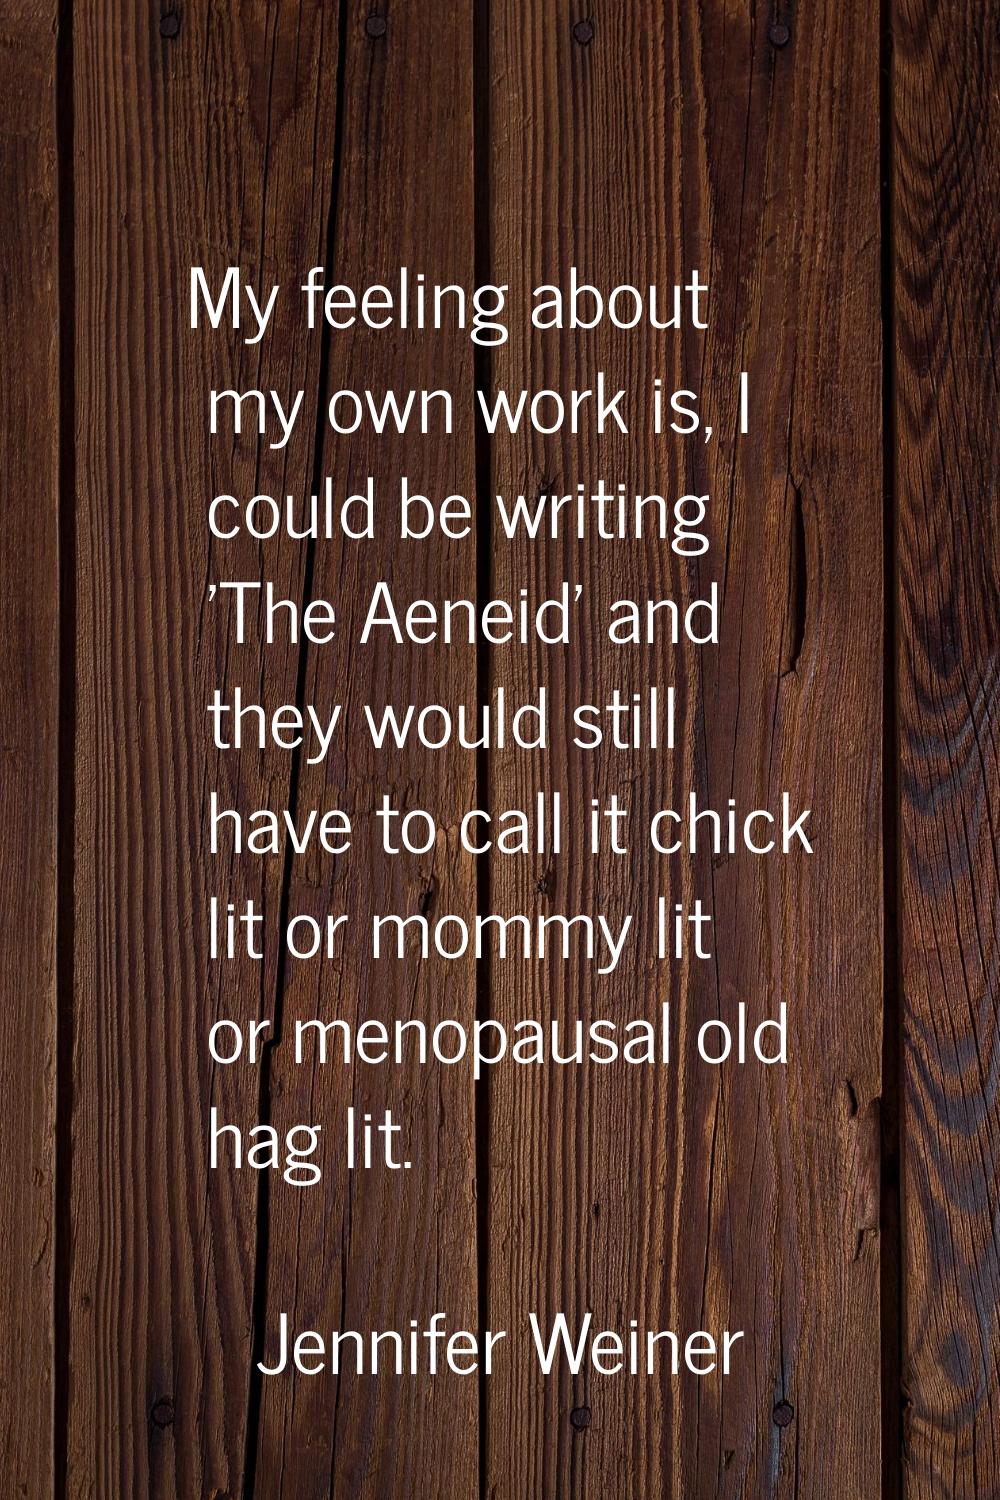 My feeling about my own work is, I could be writing 'The Aeneid' and they would still have to call 